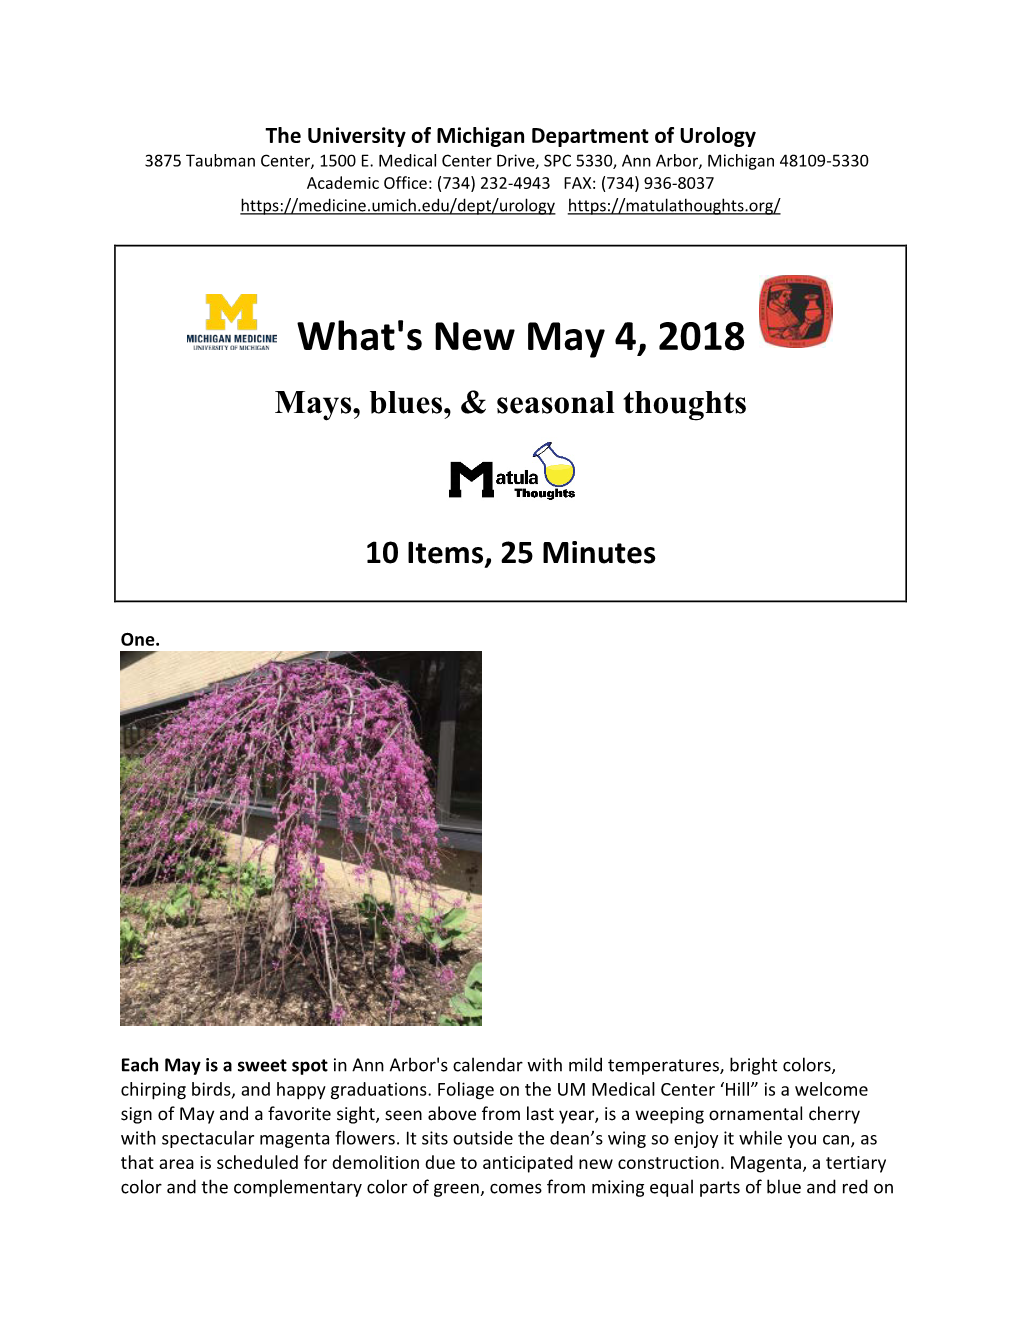 What's New May 4, 2018